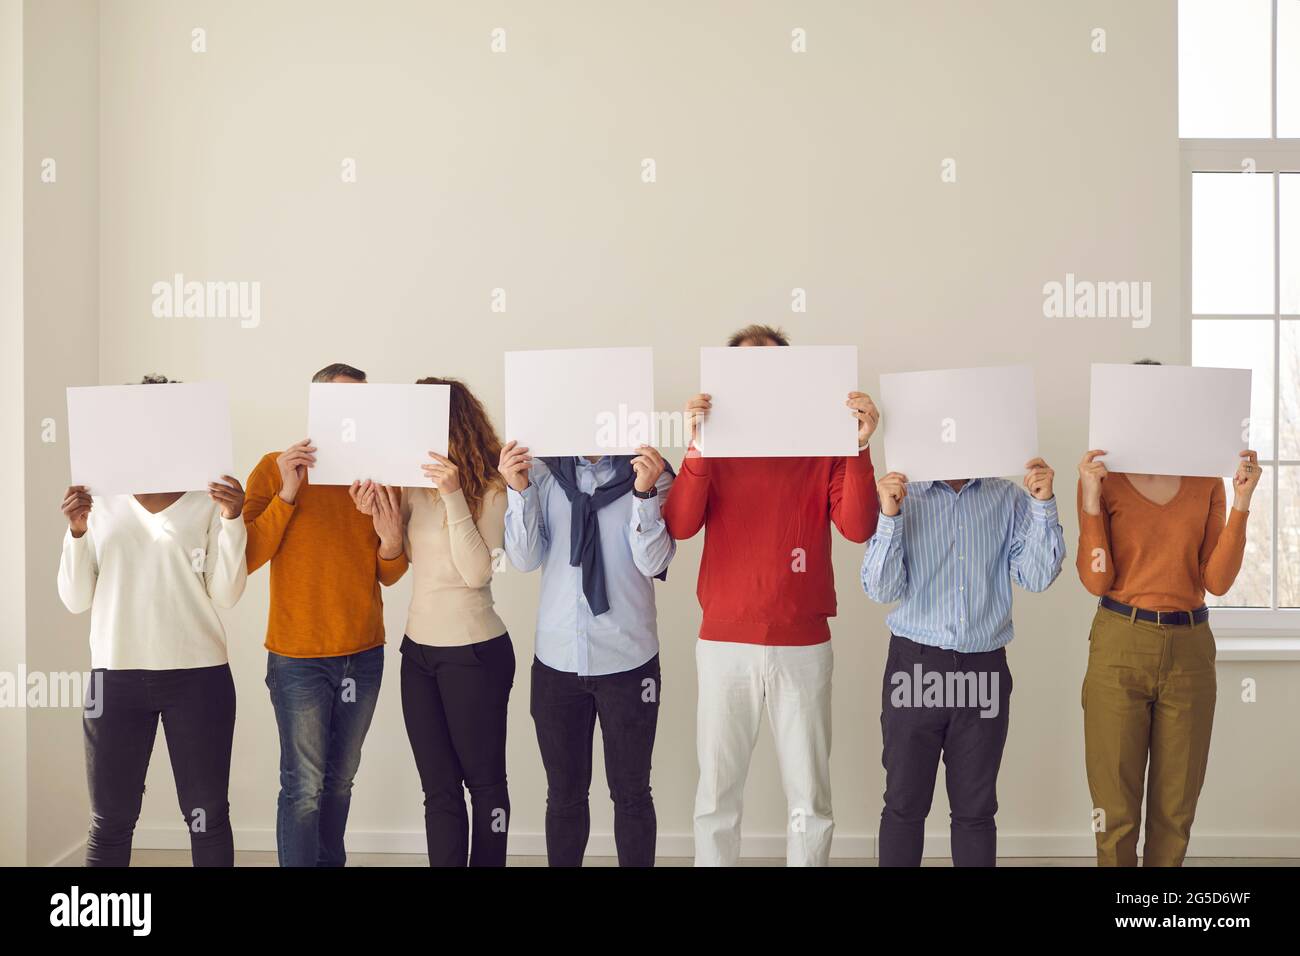 Group of people cover faces hiding behind white paper banners they are holding in hands Stock Photo